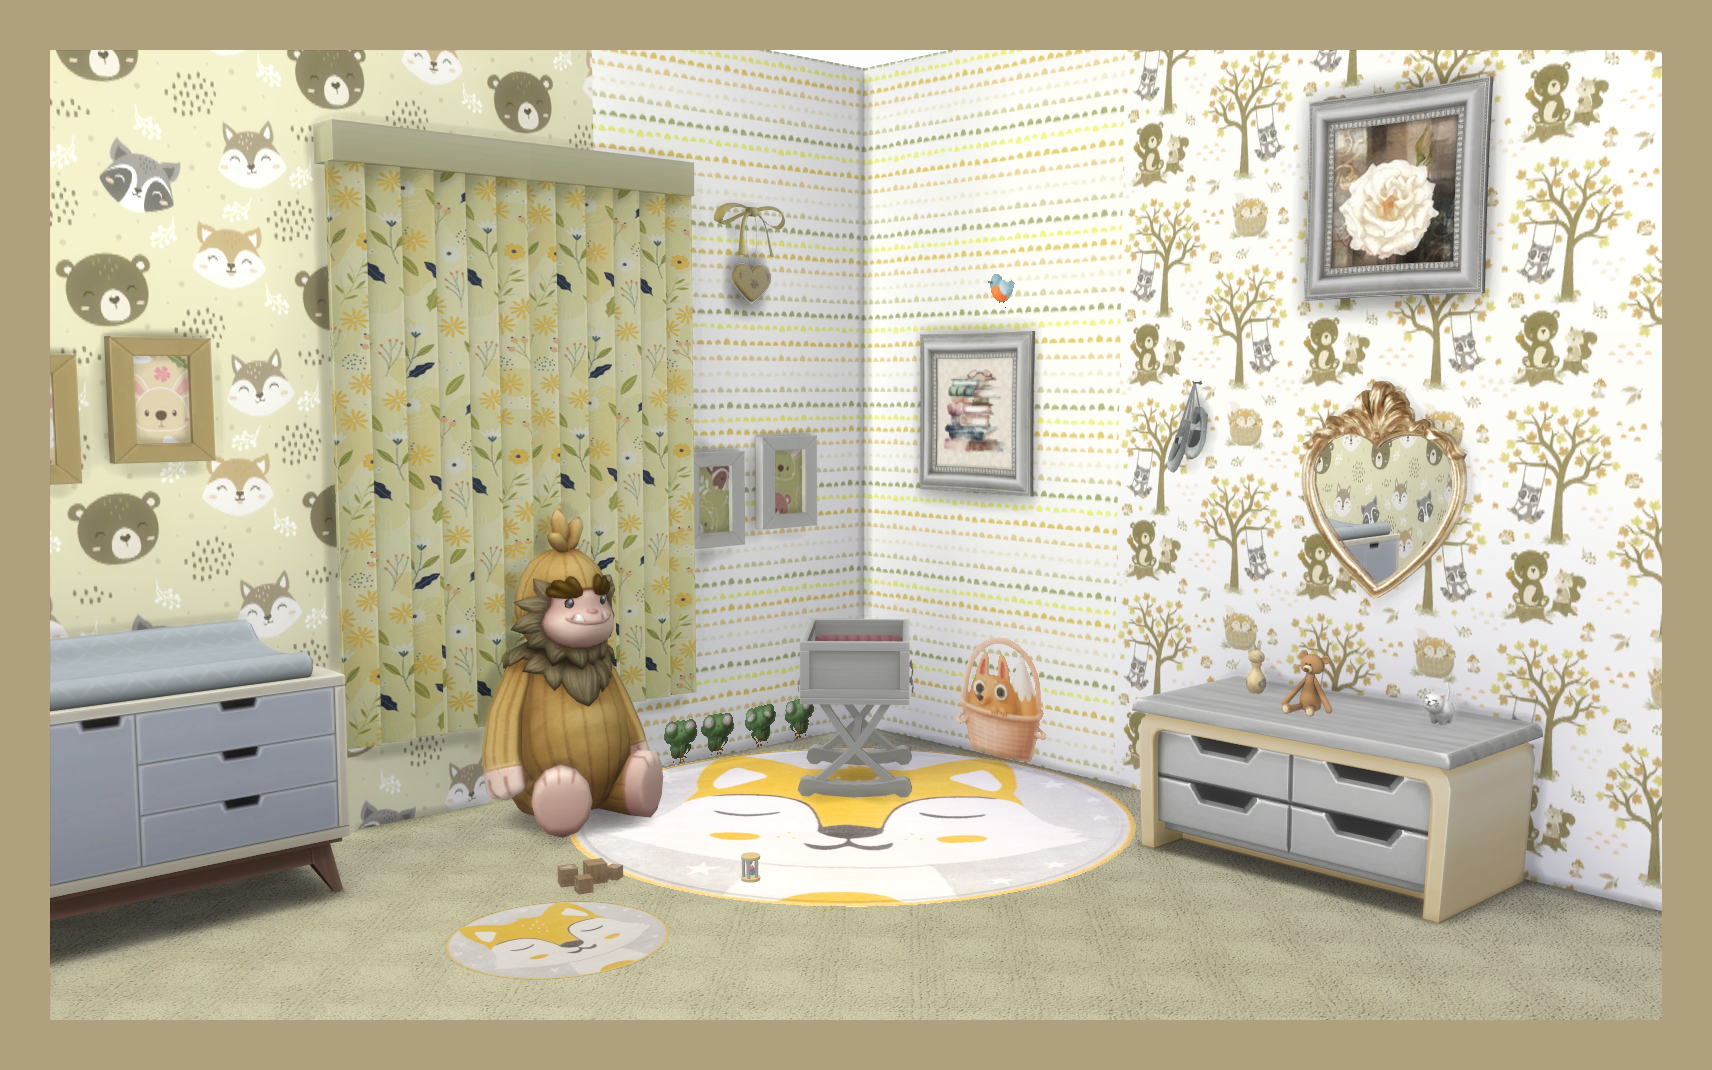 Mr.Opossum nency wallpaper - Files - The Sims 4 Build / Buy - CurseForge